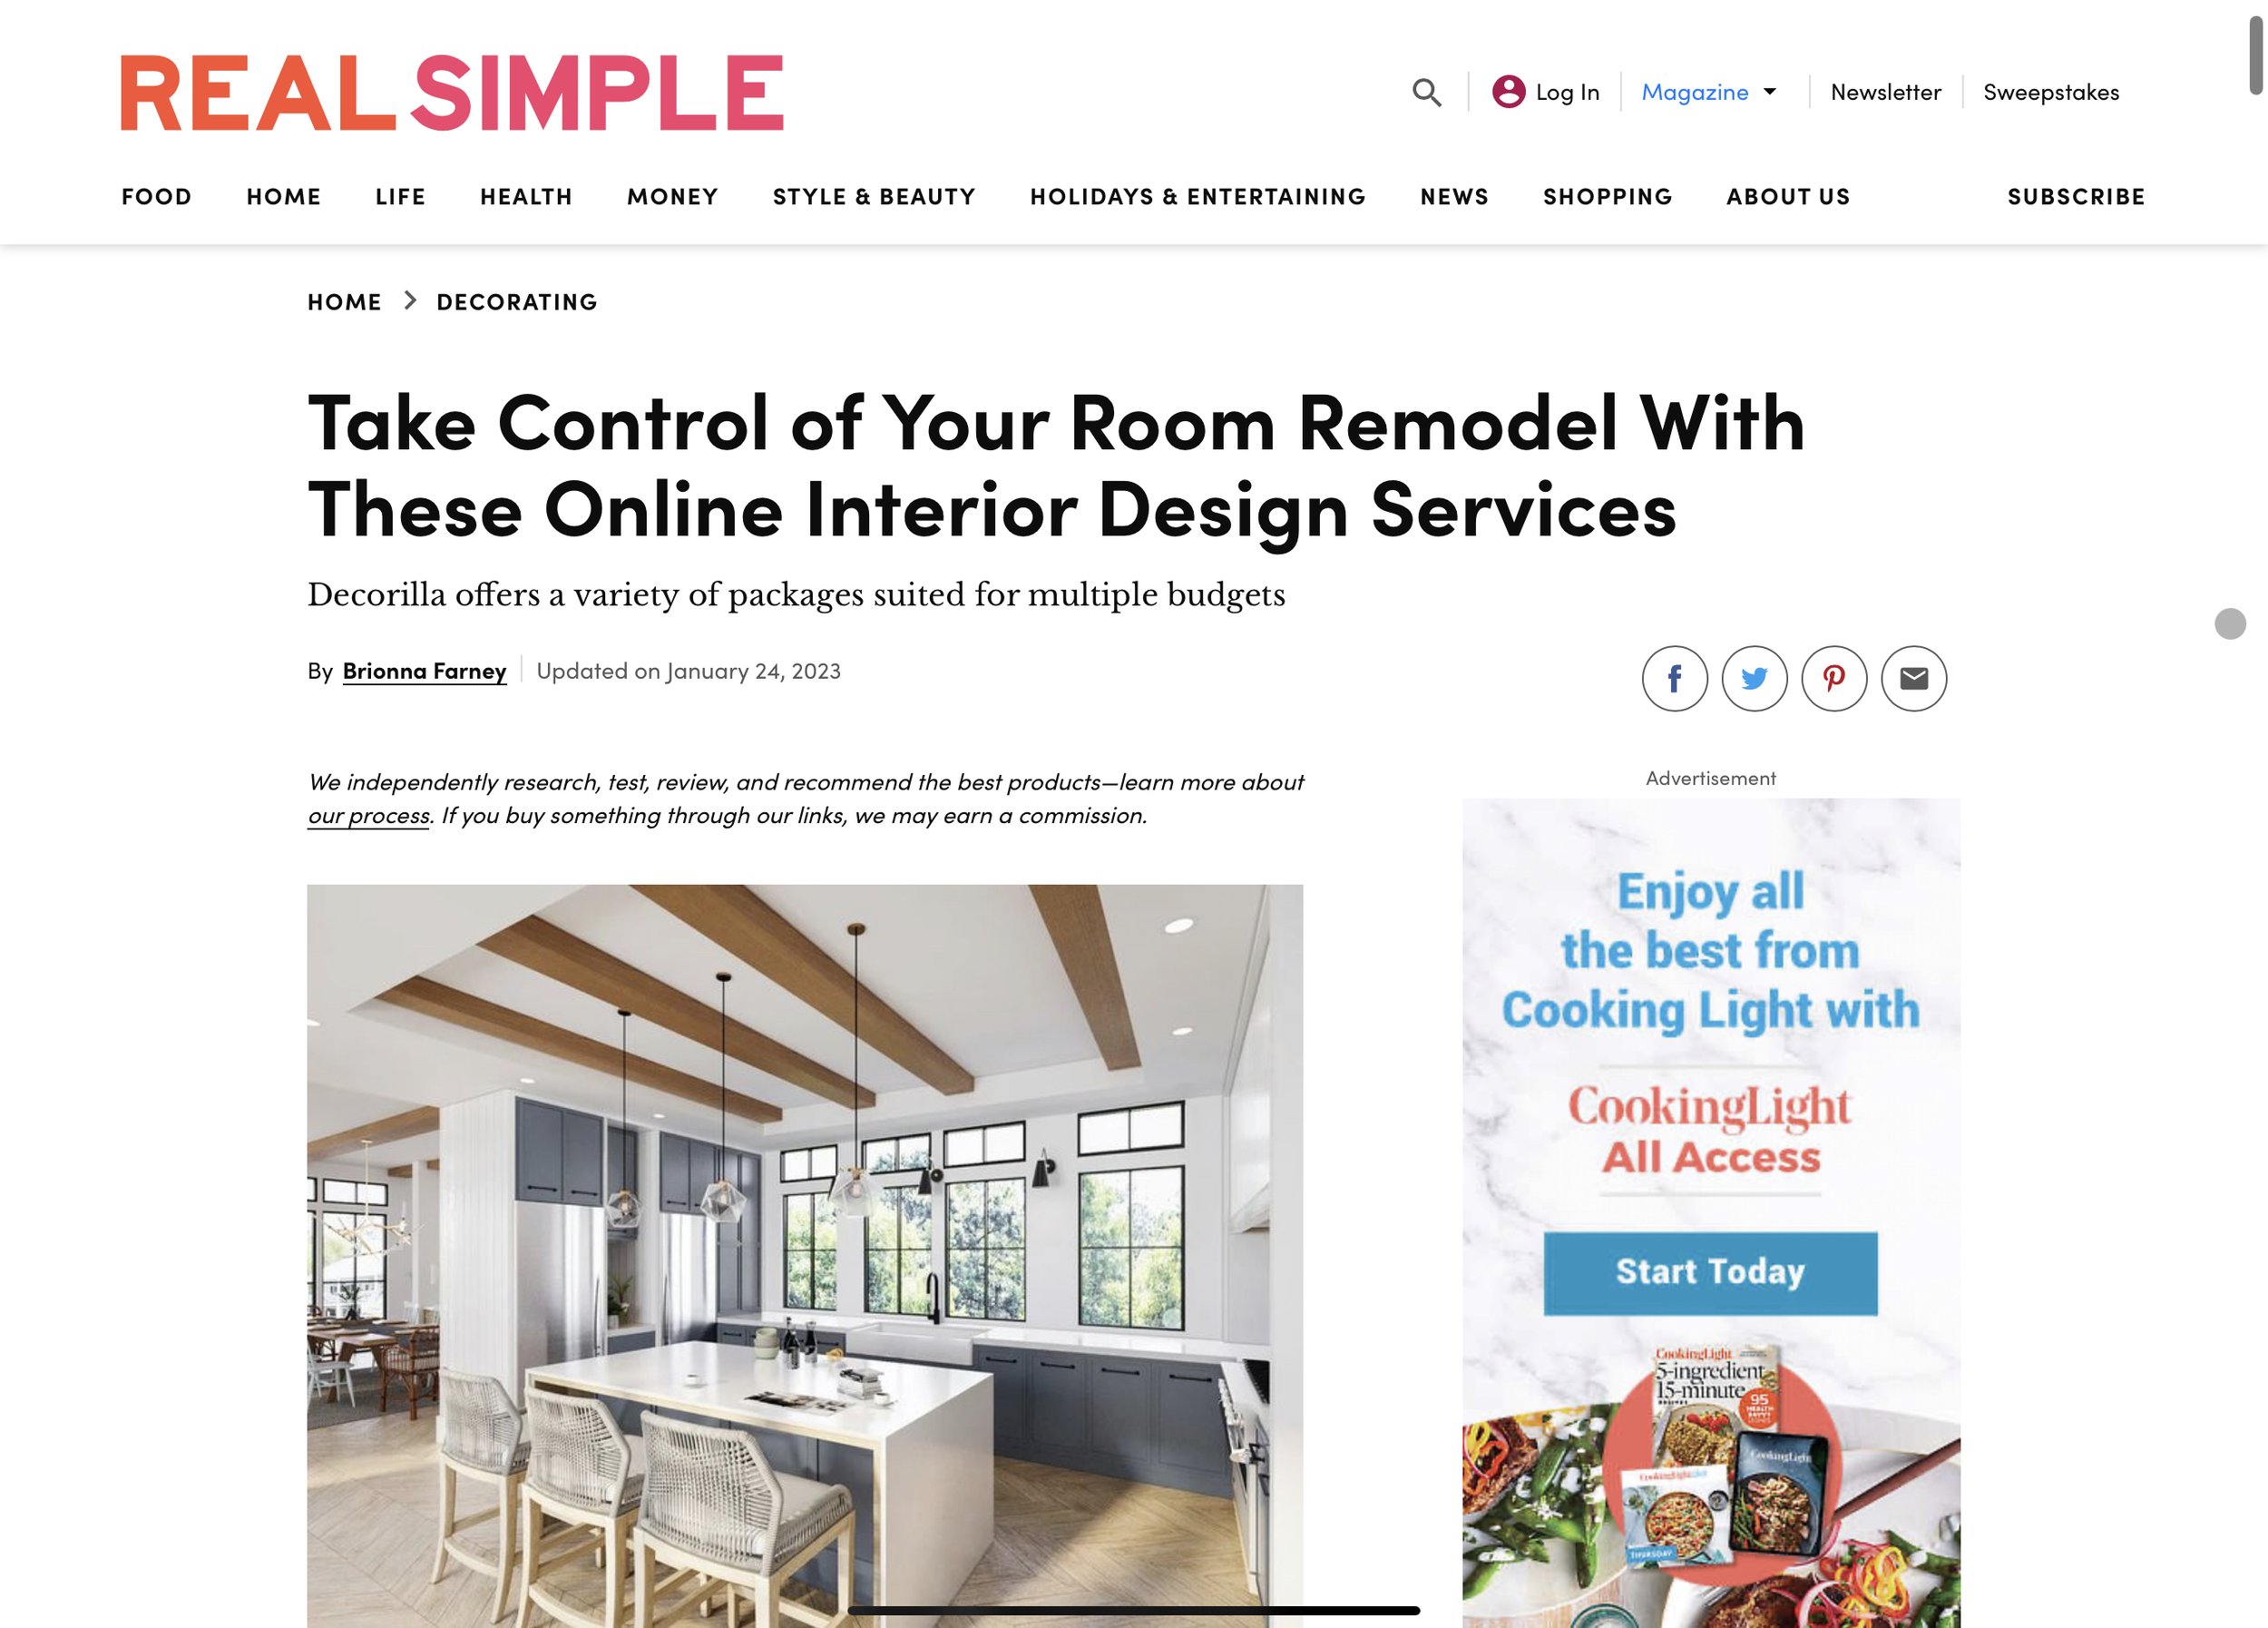 roomLift named one of 2023's Best Online Interior Design Services by Real Simple